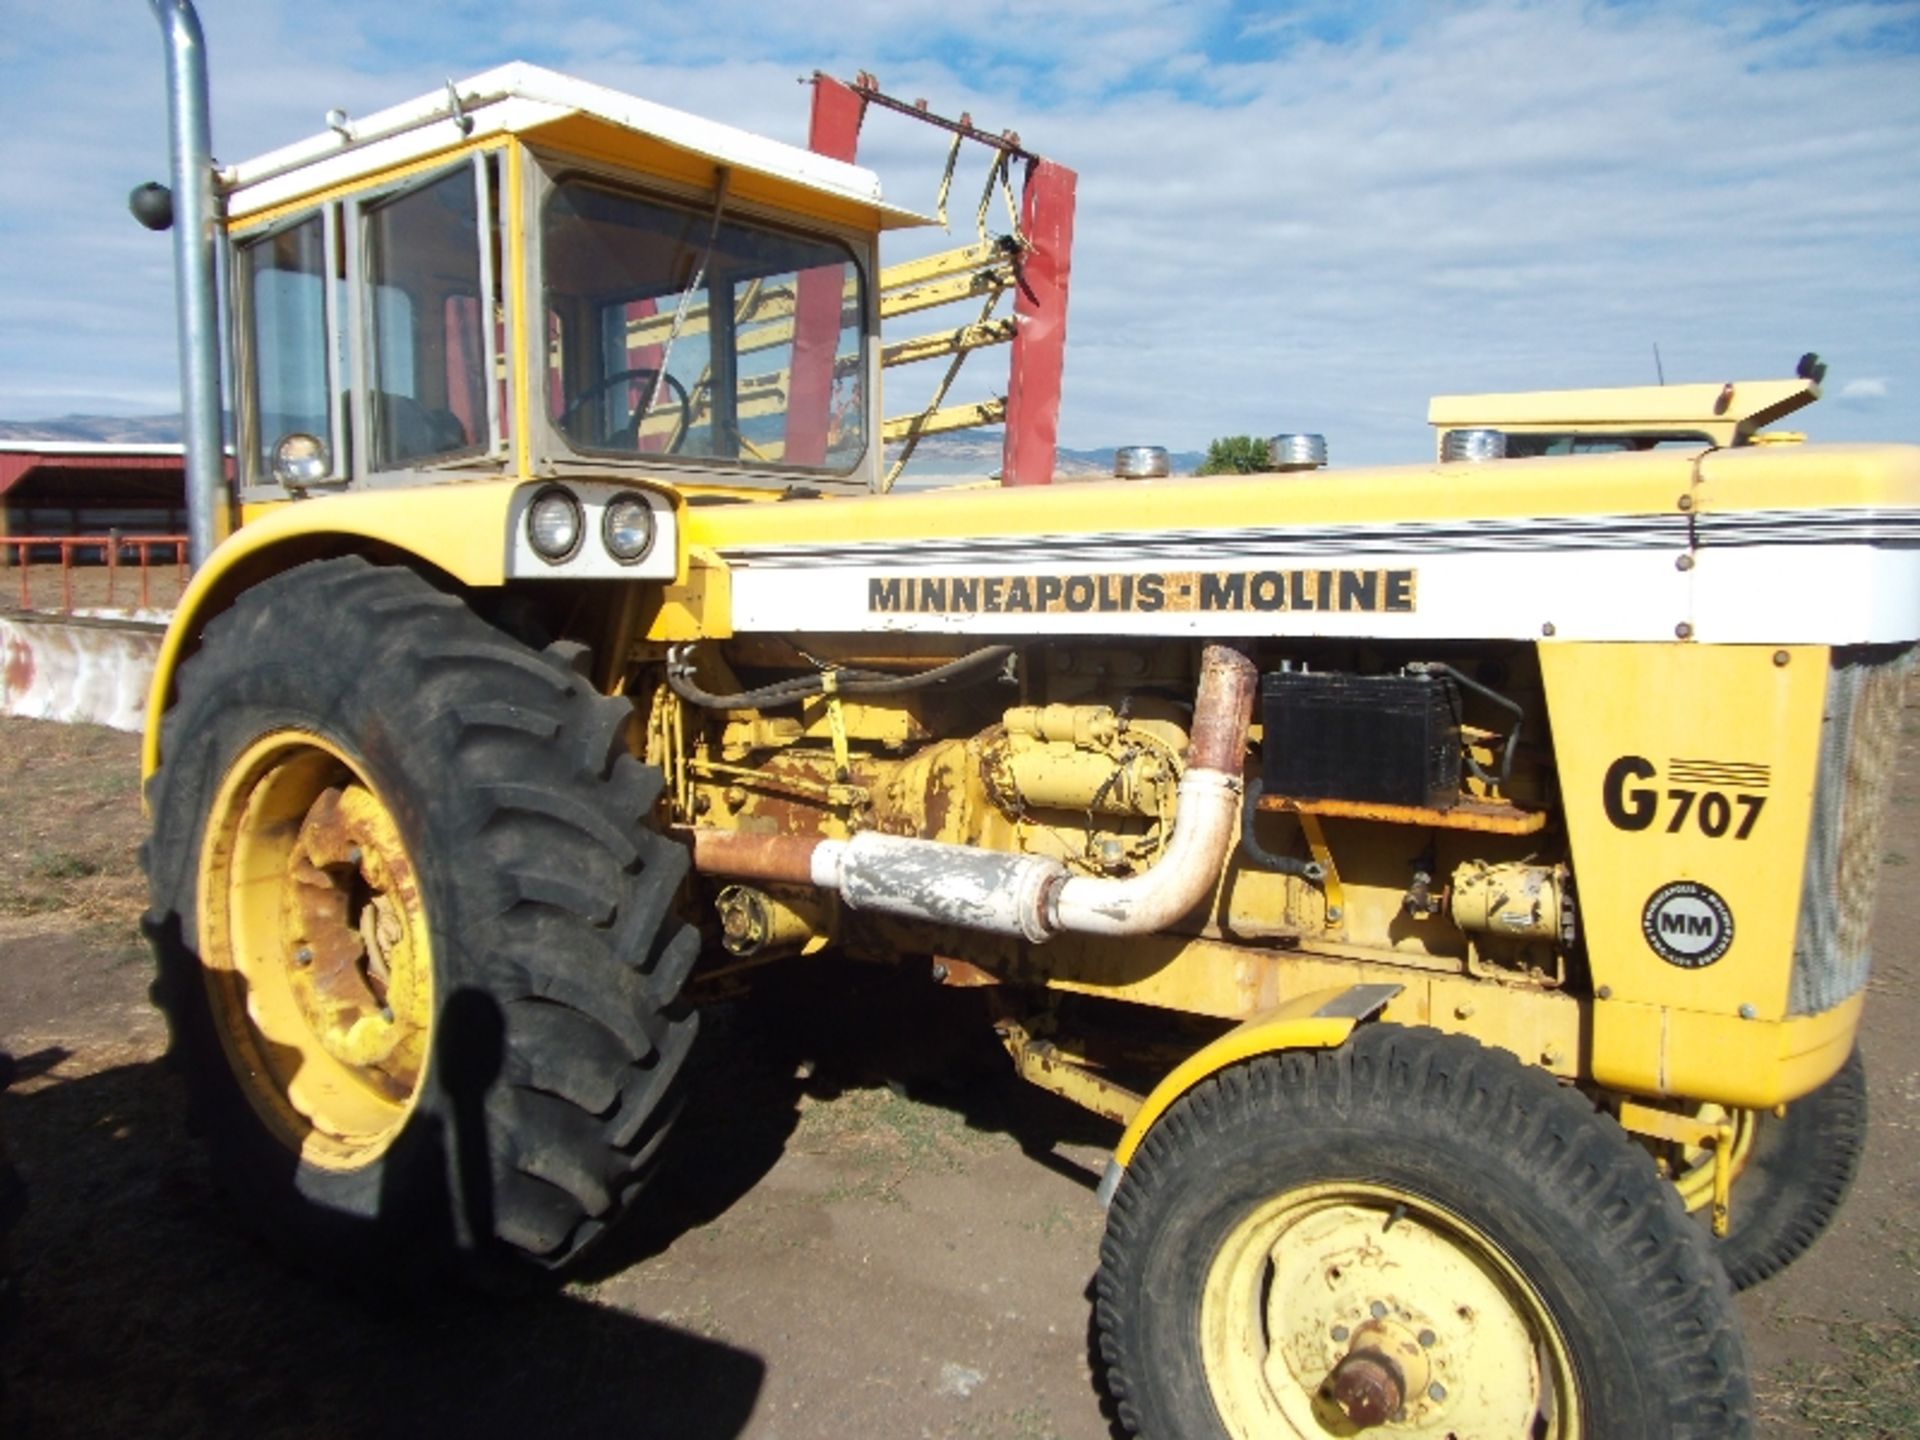 Minneapolis Moline G-707 2 hyd remotes 18.4X34 rubber wide front cab 3411 hrs - Image 2 of 12